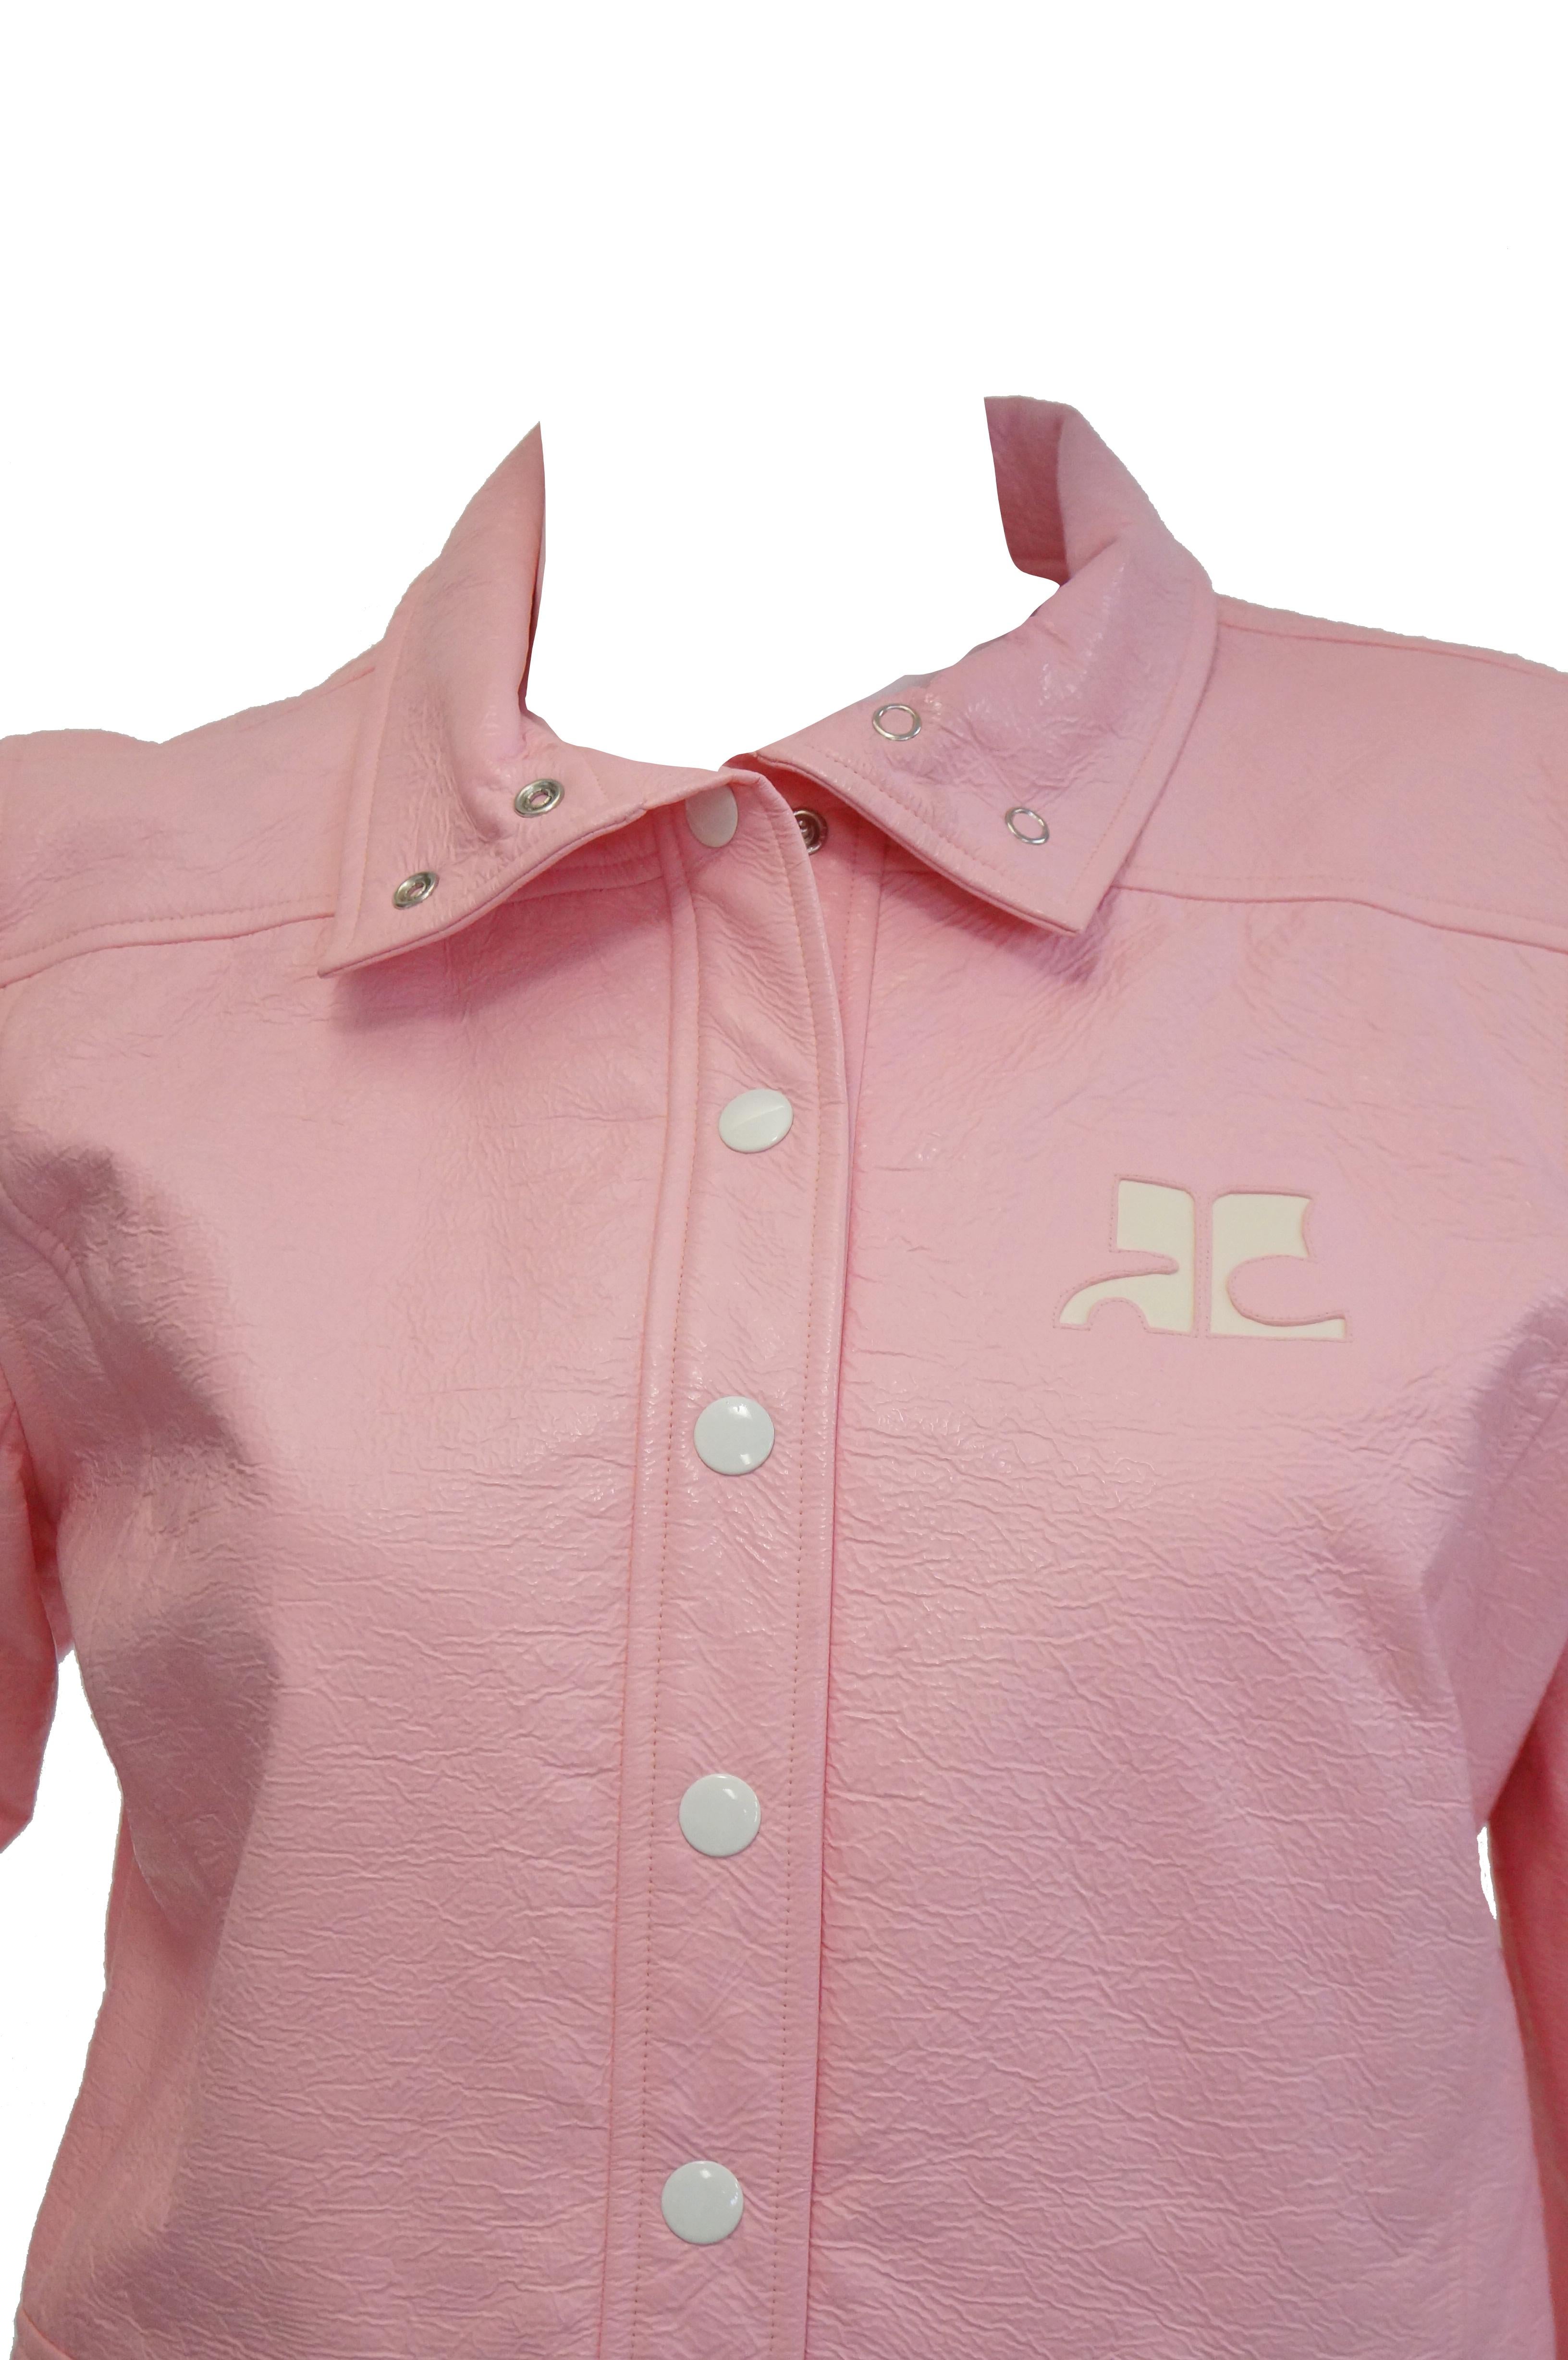 Awesome bubblegum pink 1970s jacket by Courreges! The jacket is cropped, with long sleeves, a high neck collar, and a loose and boxy fit typical of late 1970s Courreges. The iconic Courreges logo features prominently in white vinyl on the left